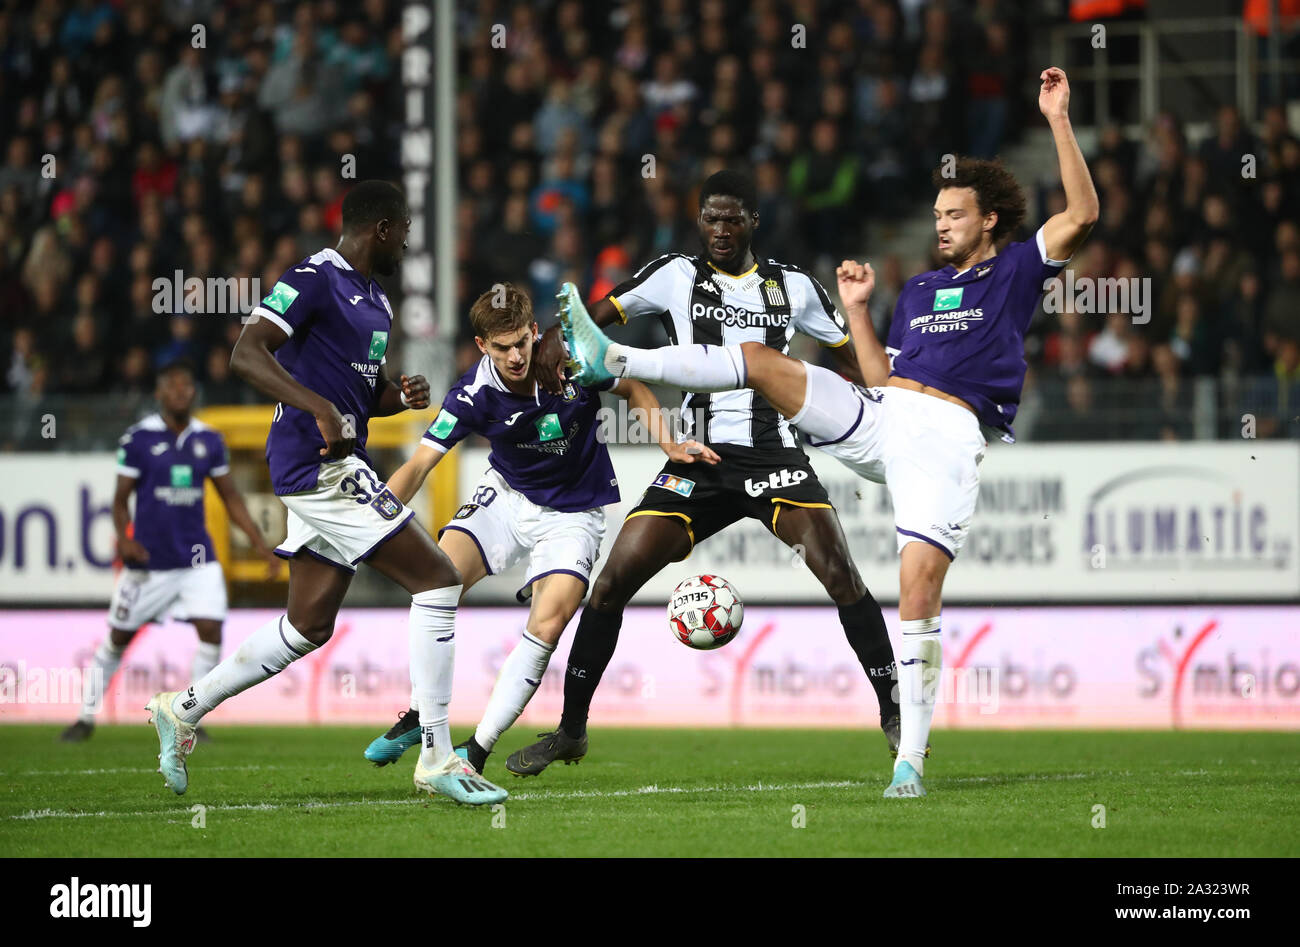 CHARLEROI, BELGIUM - OCTOBER 04: Sieben Dewaele of Anderlecht battles for  the ball with Shamar Nicholson of Charleroi and Philippe Sandler of  Anderlecht during the Jupiler Pro League match day 10 between